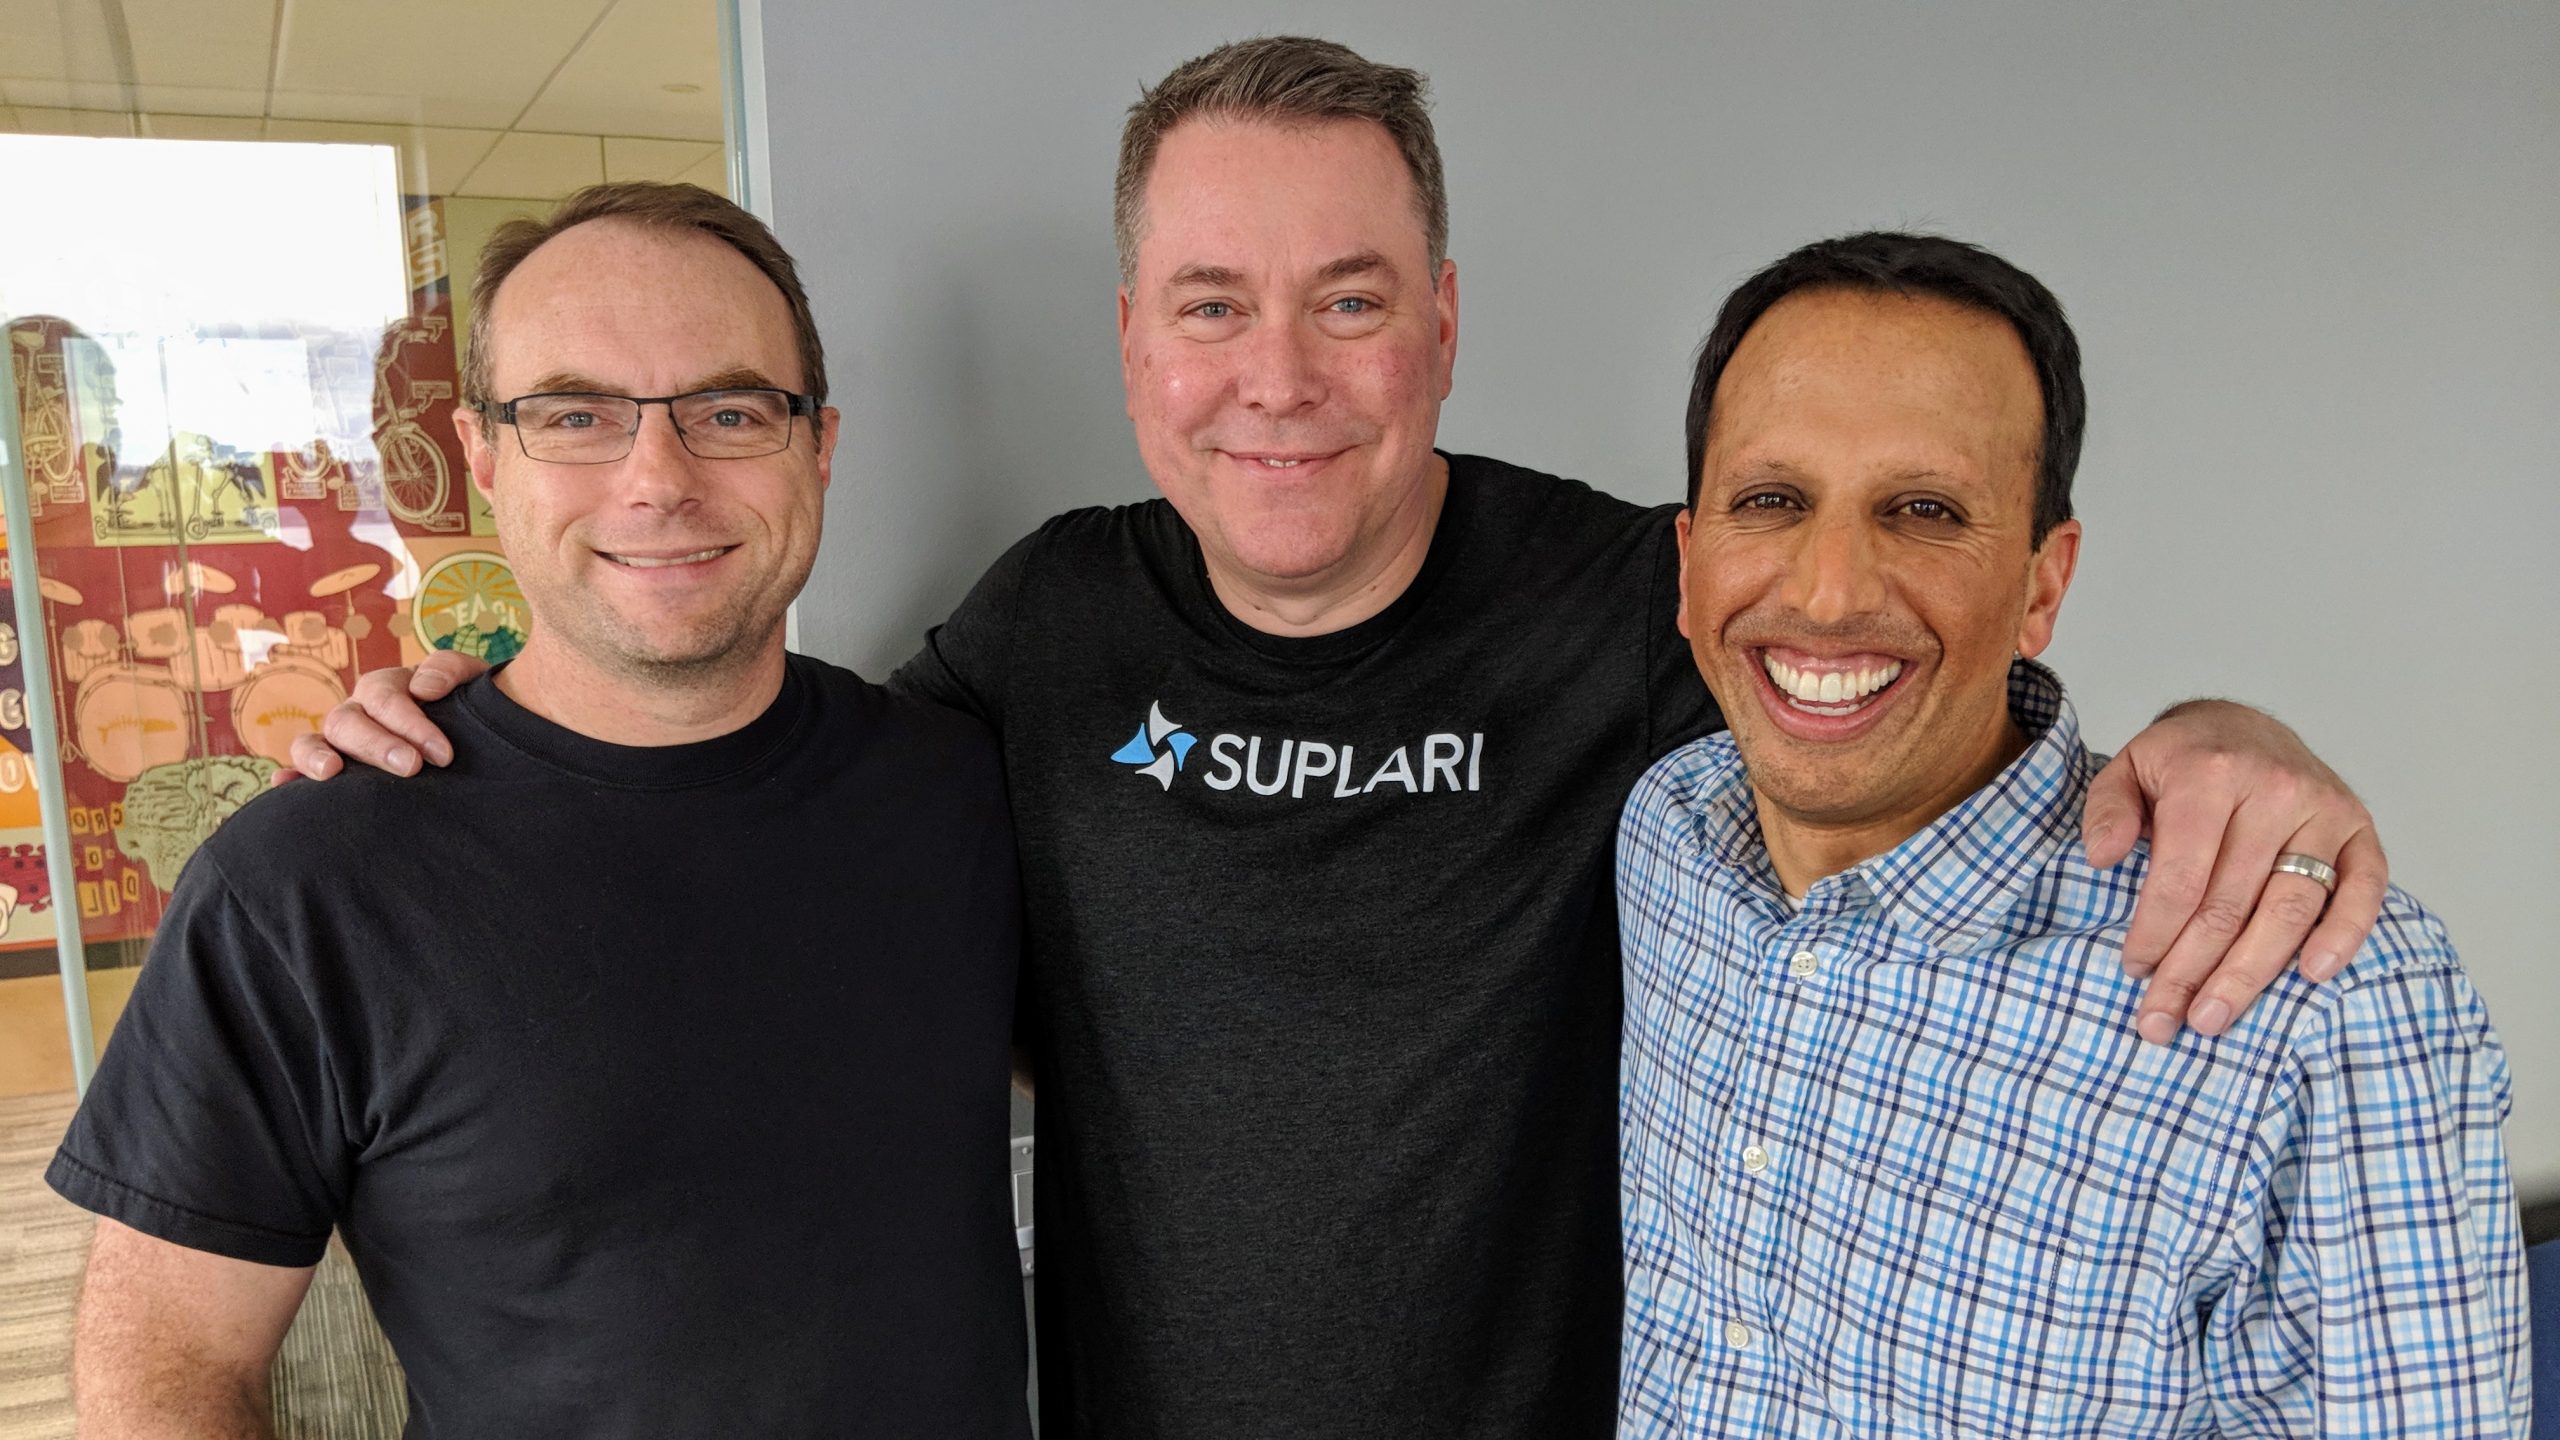 Microsoft acquires Seattle startup Suplari, which uses AI to analyze corporate spending